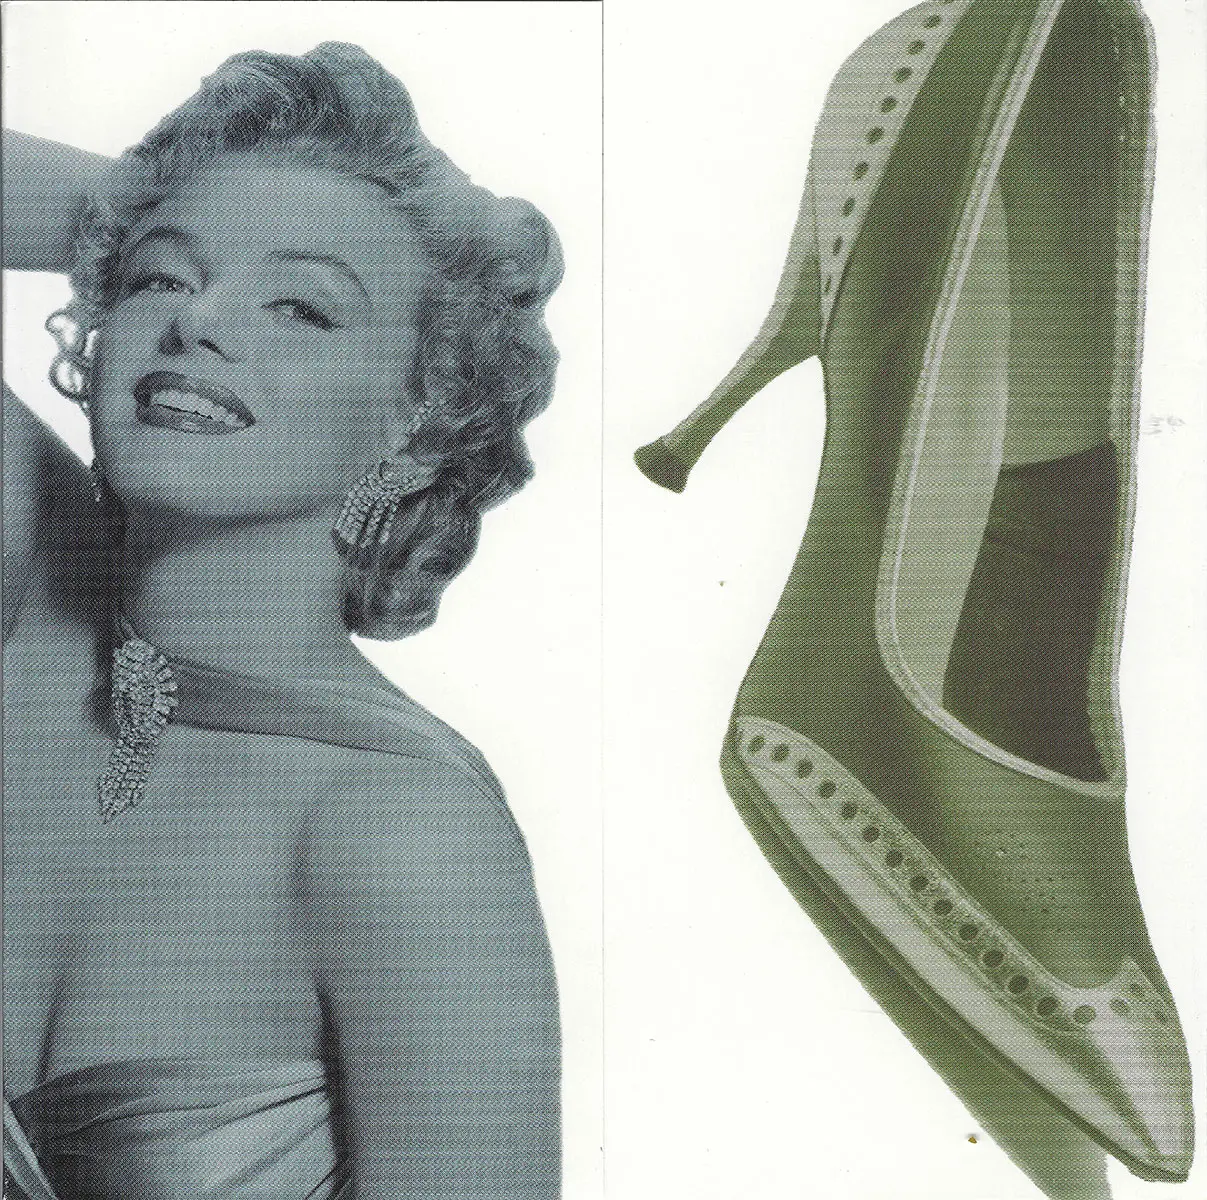 June 2002 Sothebys.com Advertisement For The Marilyn Monroe And LaRose Auctions